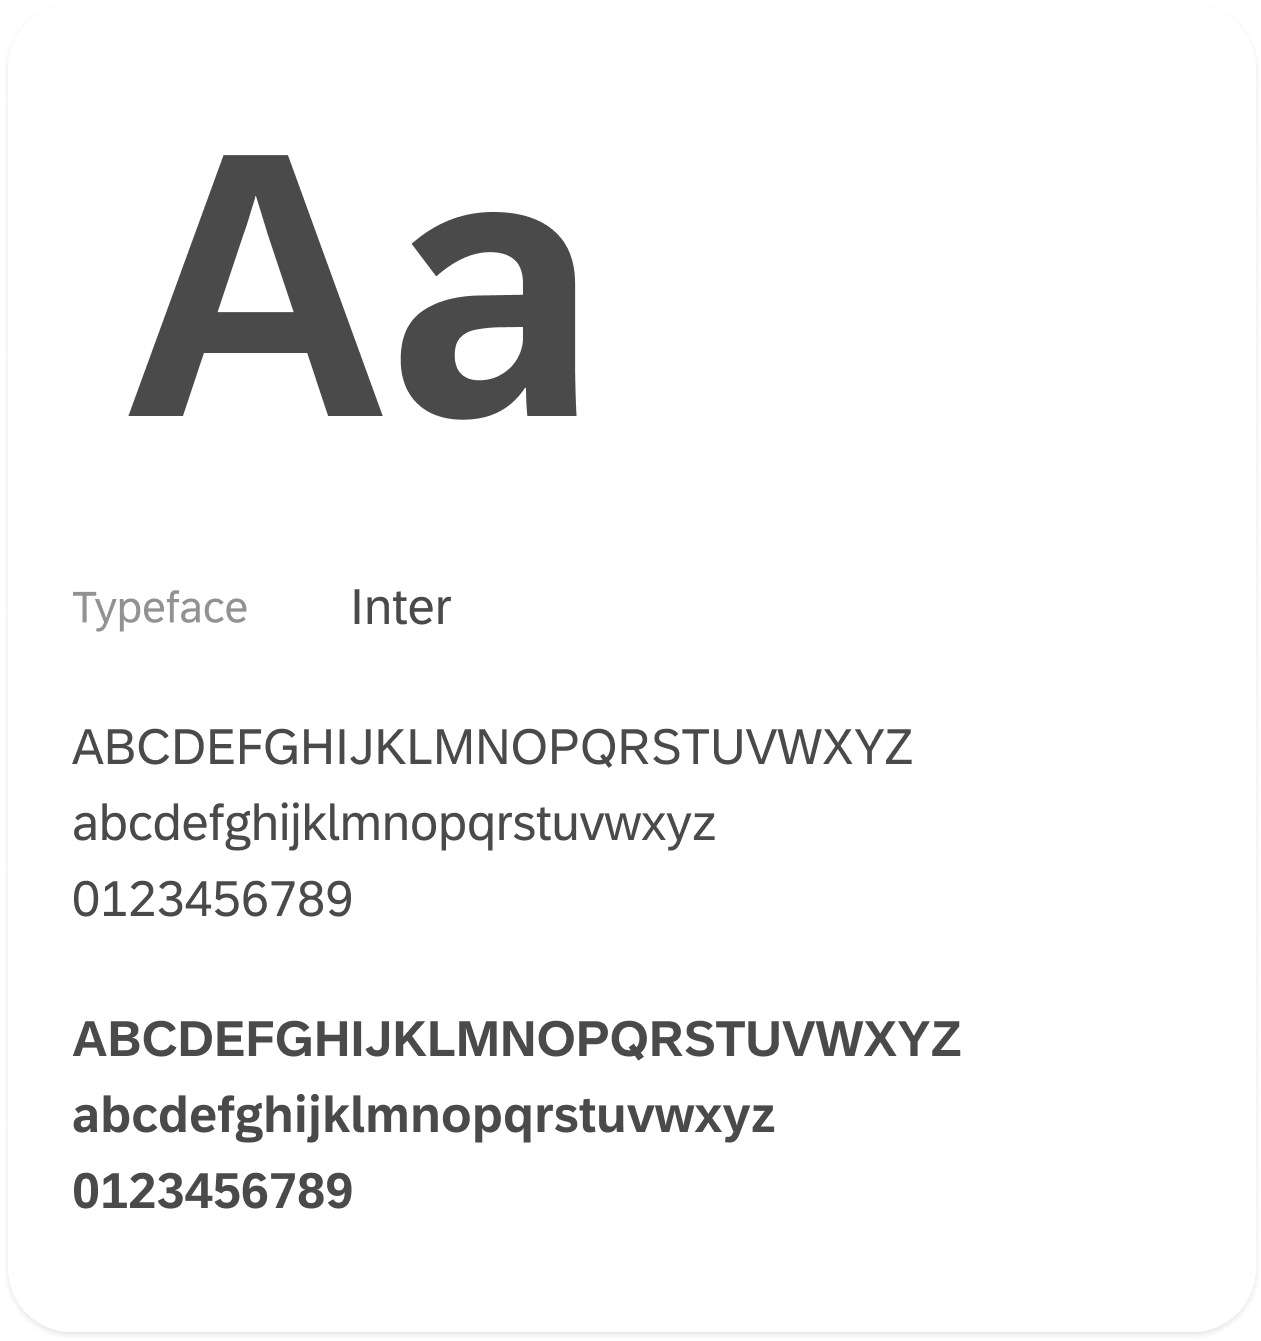 Font used Inter